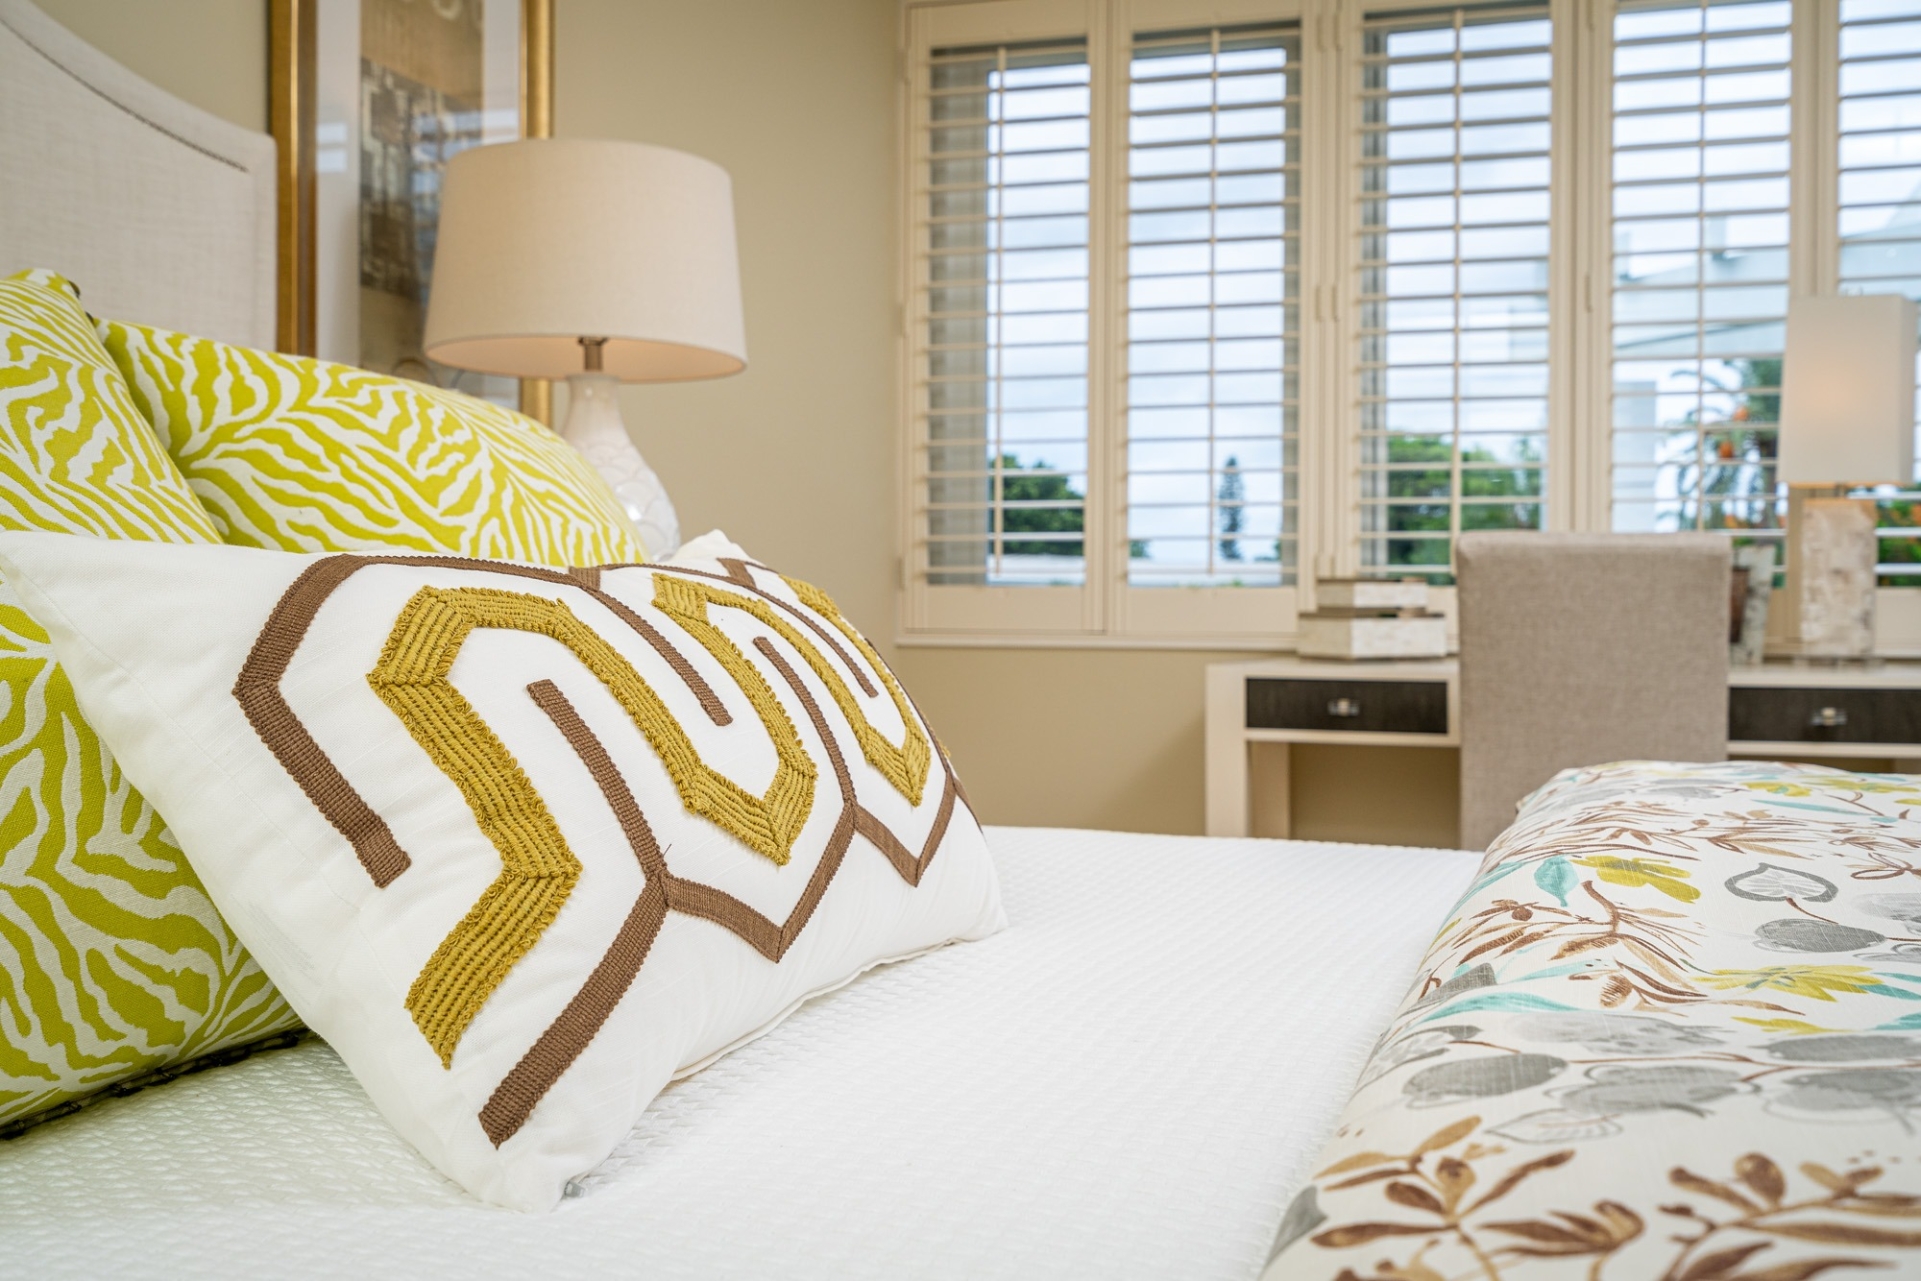 The master bedroom at the Junonia Model Home at Shell Point Retirement Community